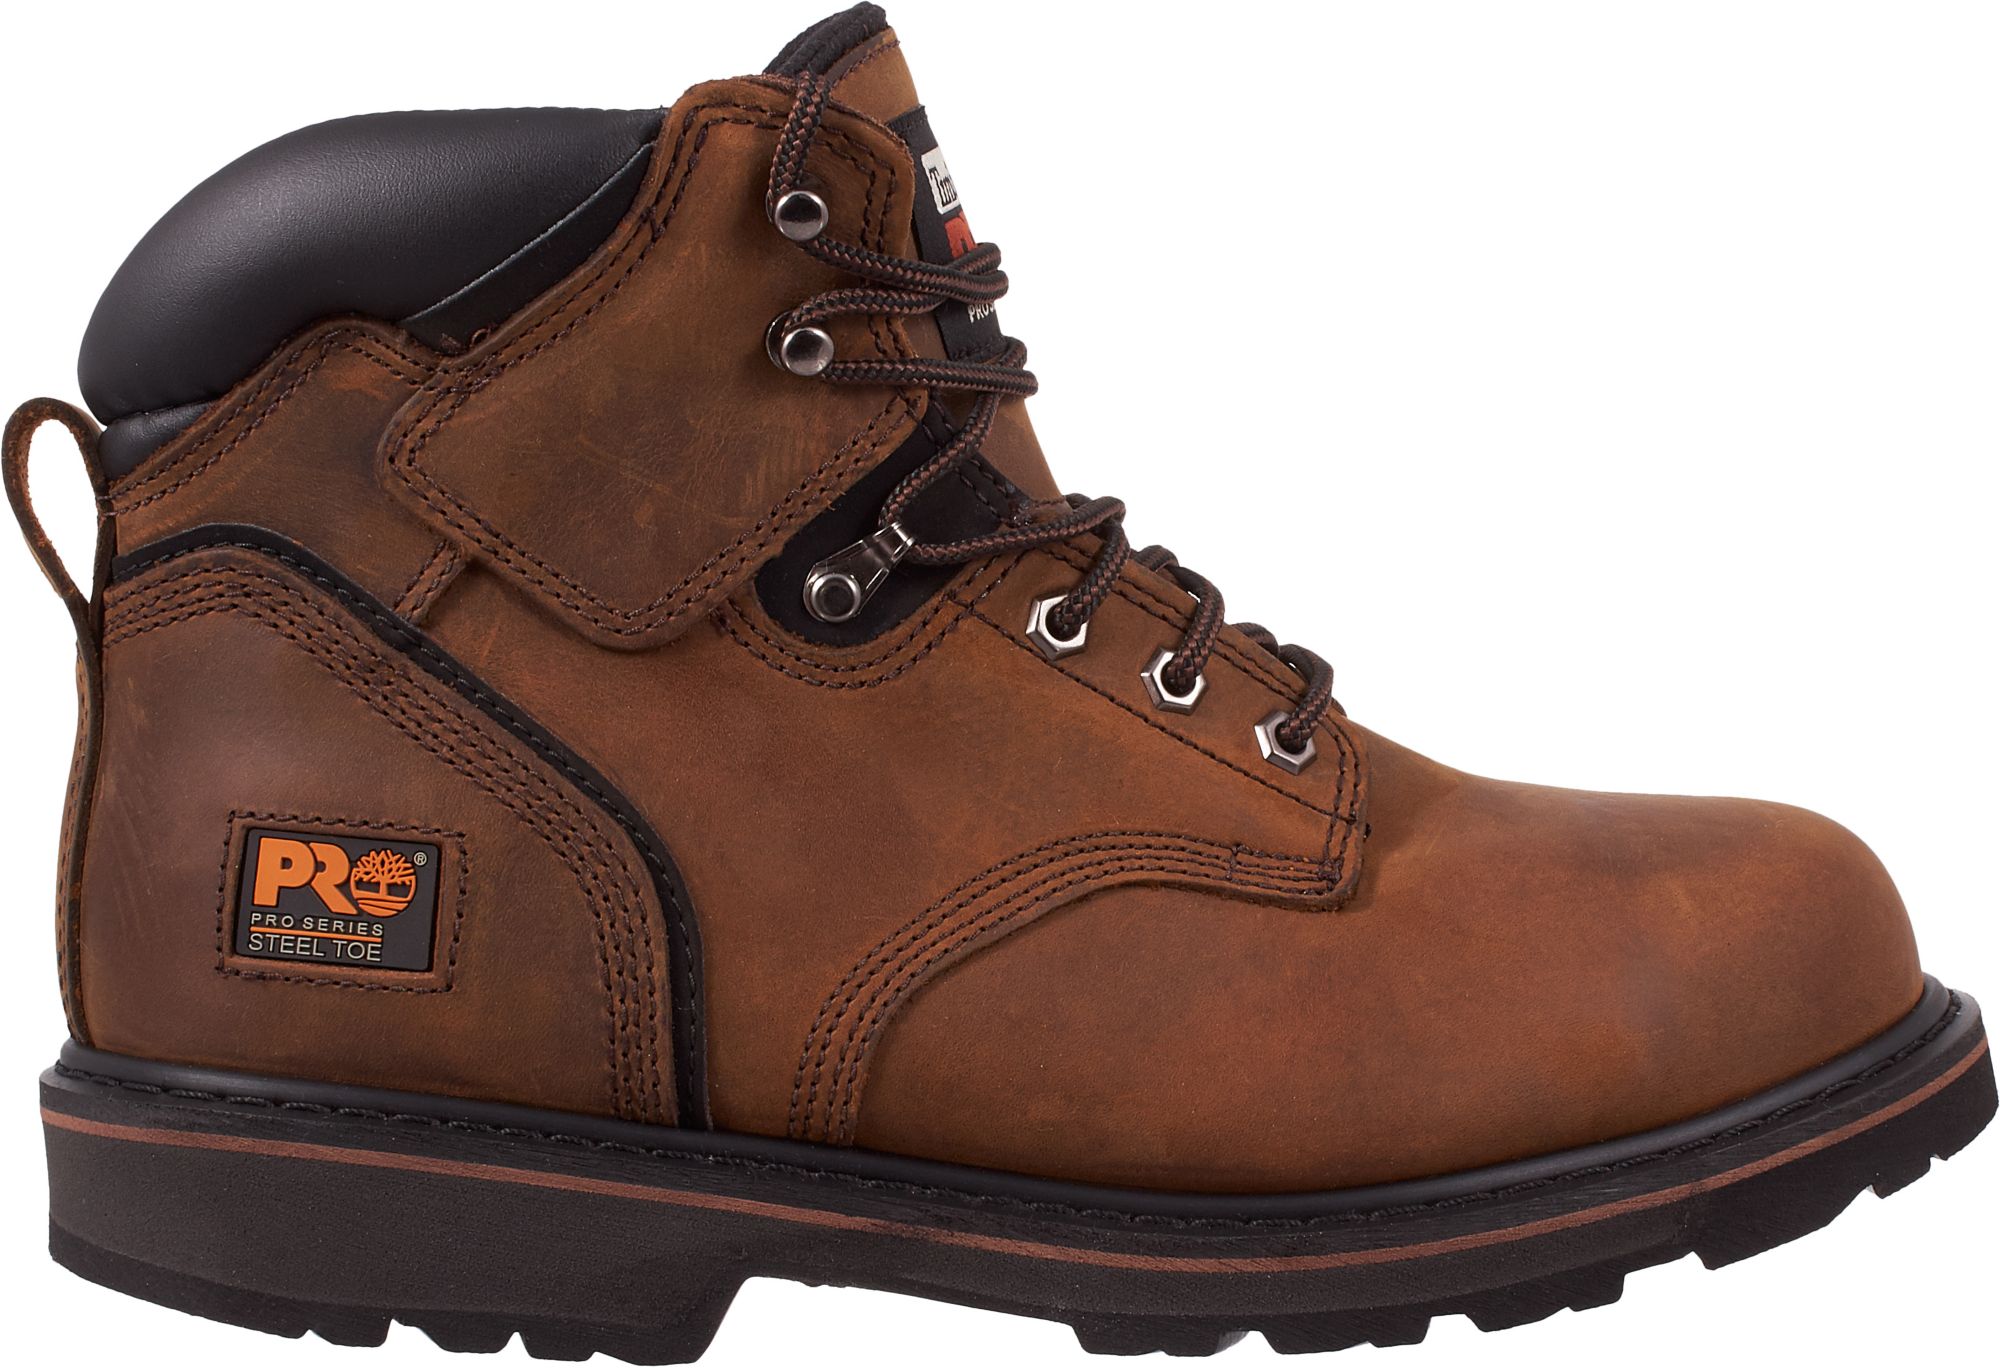 Timberland PRO Men's Pit Boss 6'' Steel Toe Work Boots | DICK'S ...